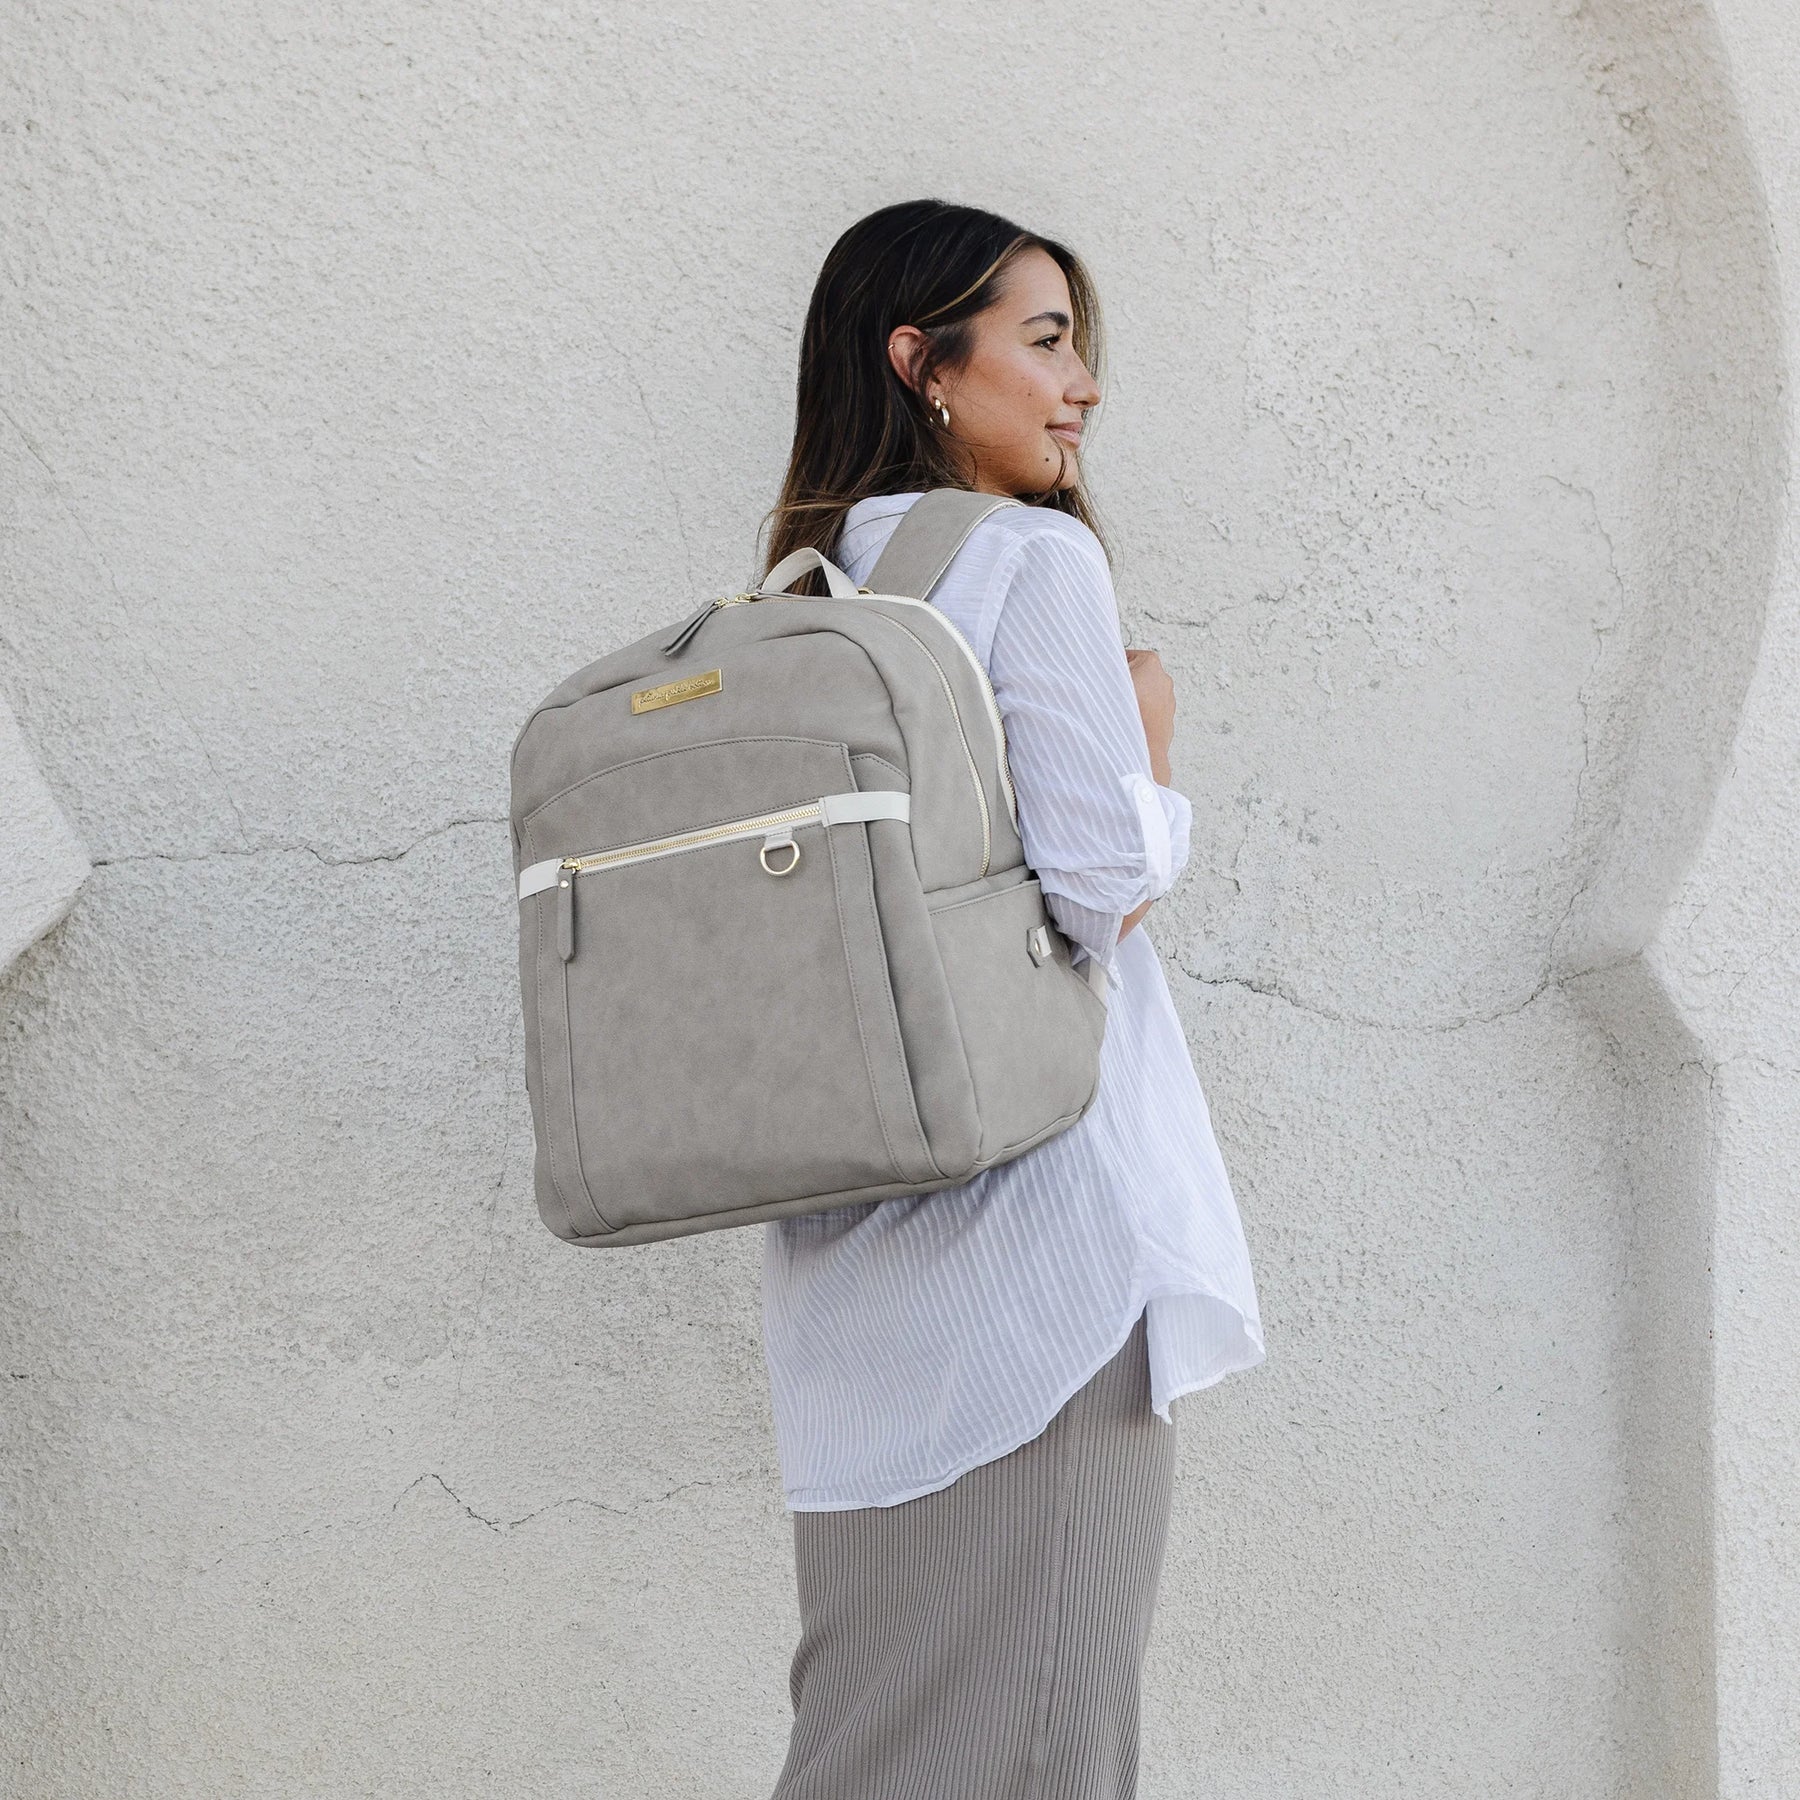 mom wearing the provisions backpack in grey matte leatherette